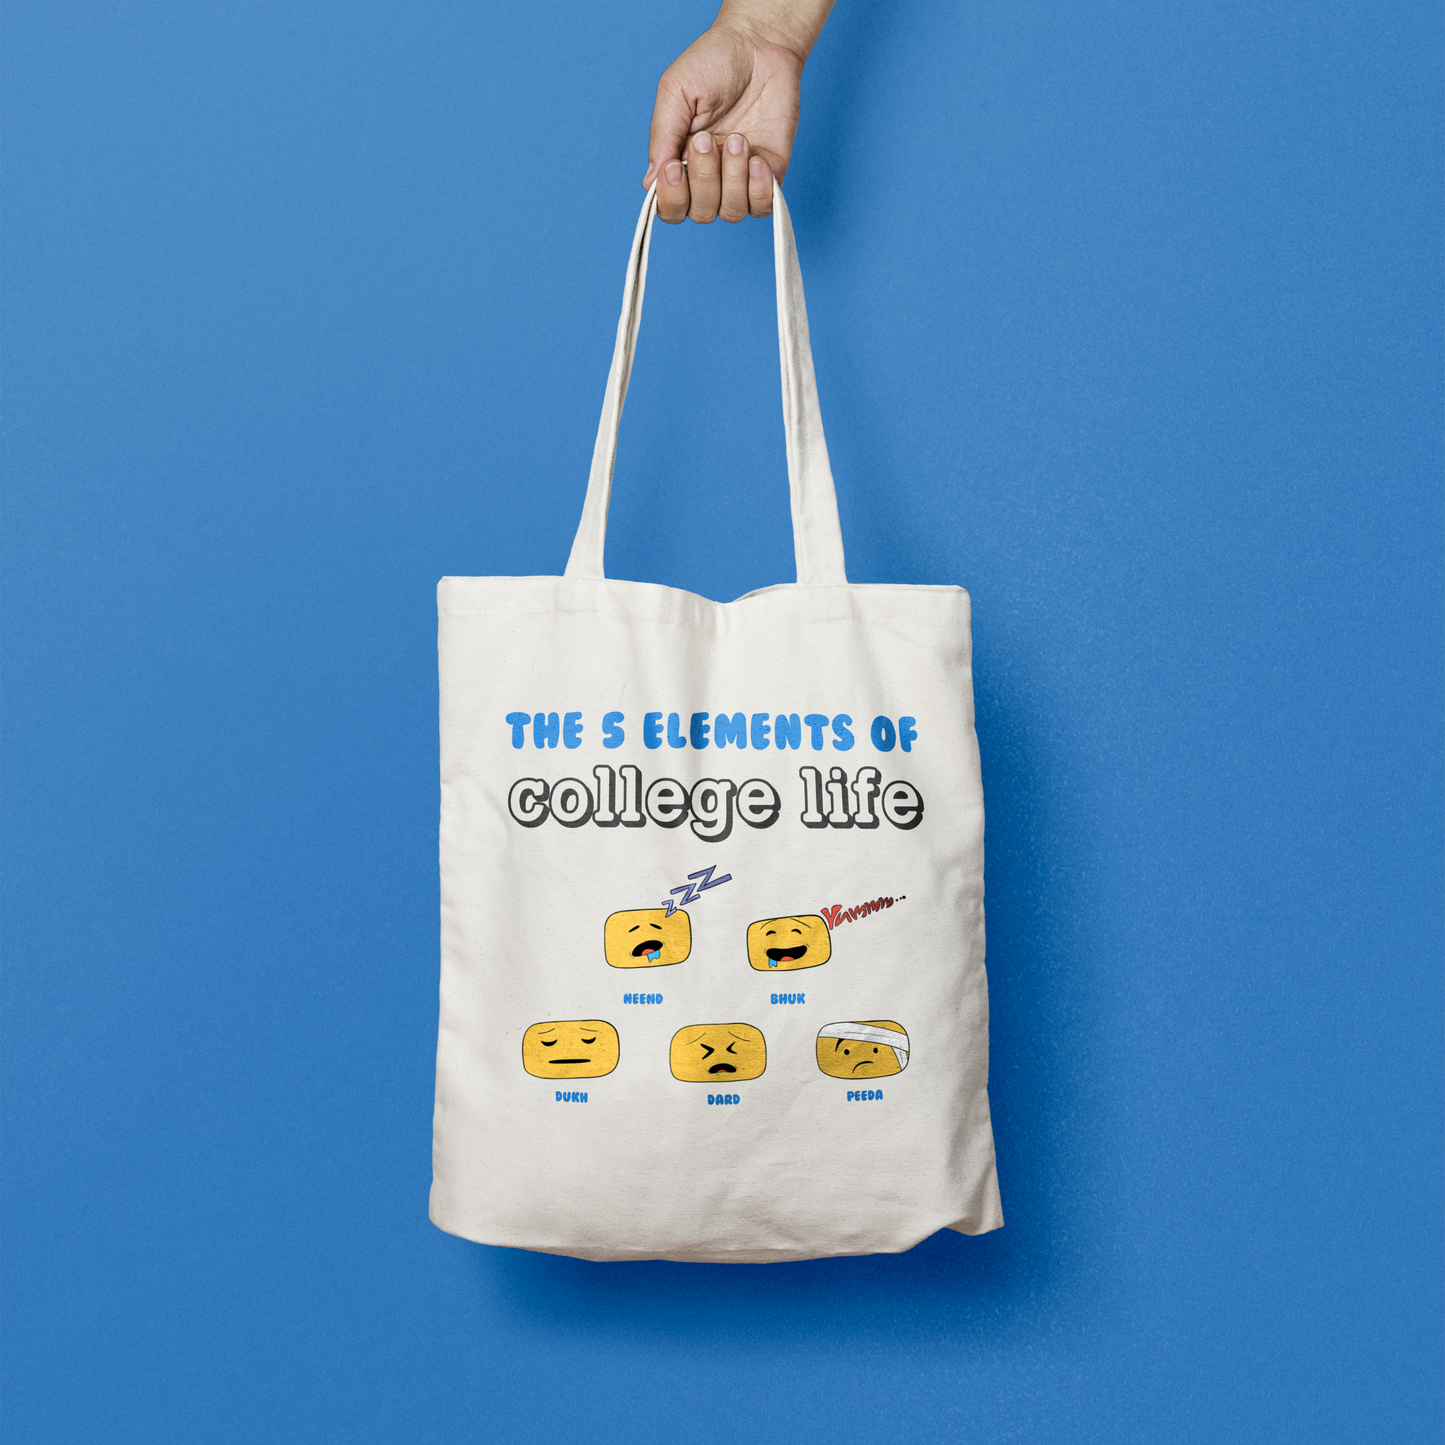 5 elements of college life (Totebag) by huihui